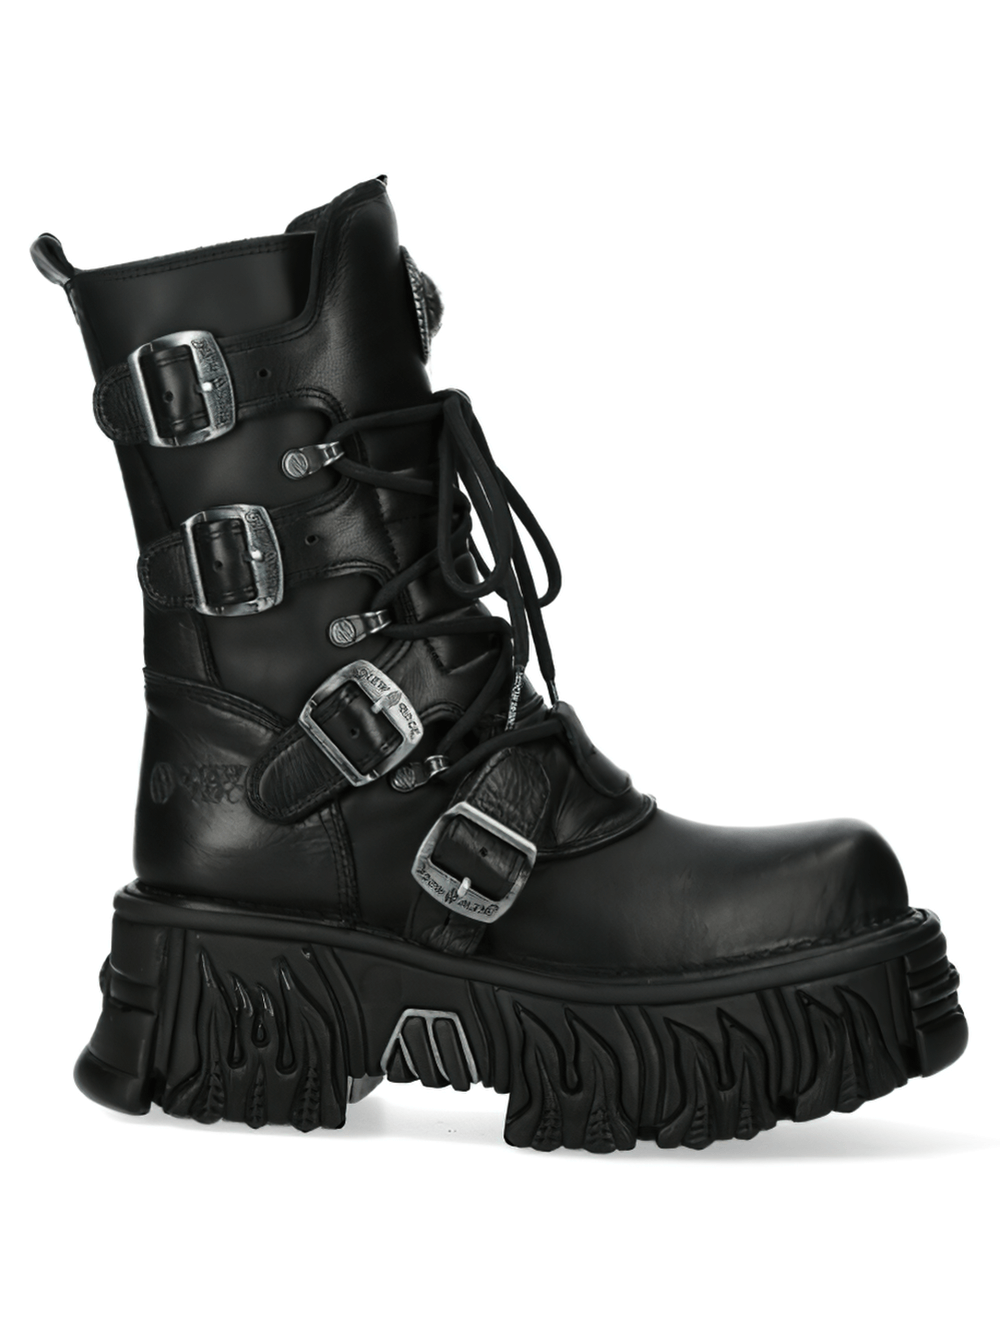 NEW ROCK Gothic Platform Boots with Multiple Buckles